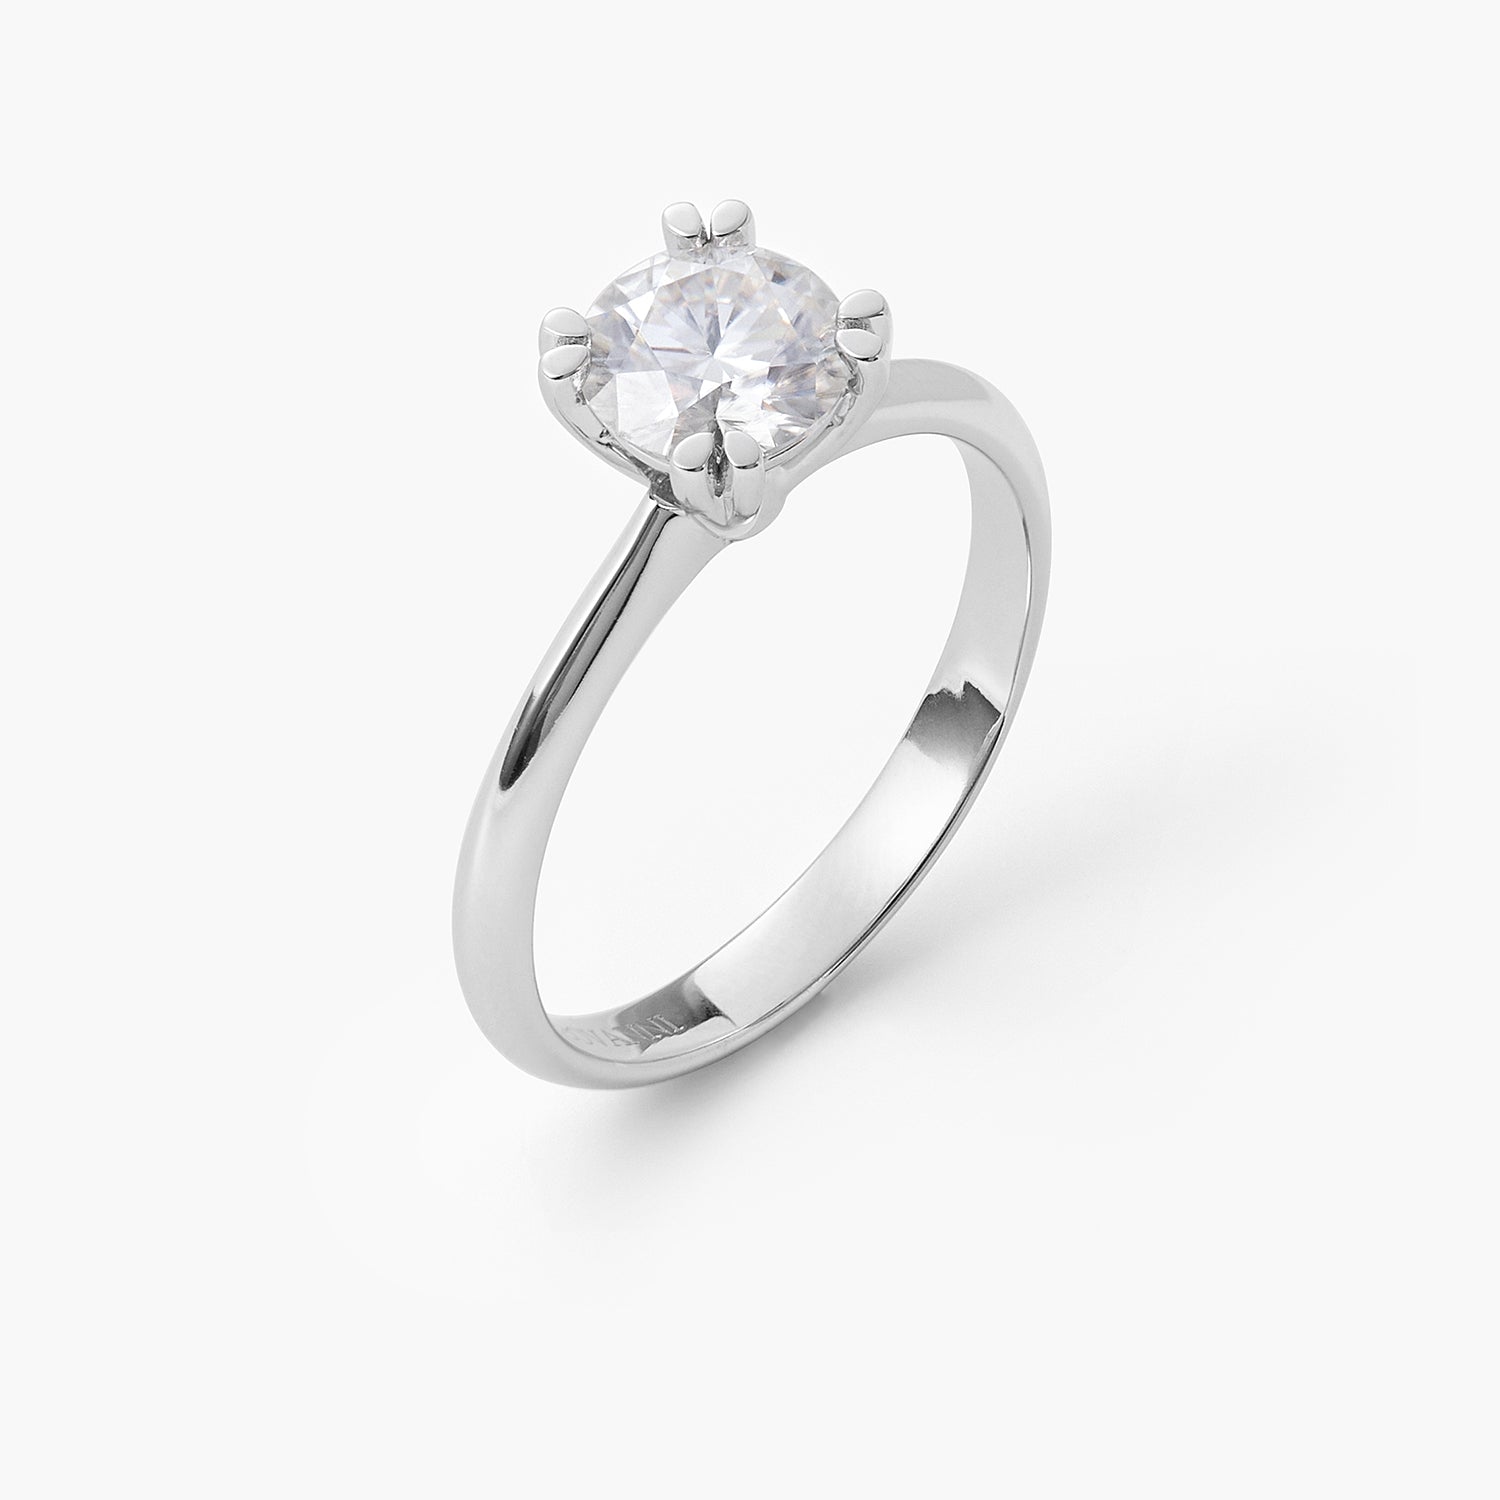 Double Four Prong Ring Round Cut Solitaire Moissanite Diamond with Sapphire Engagement Ring